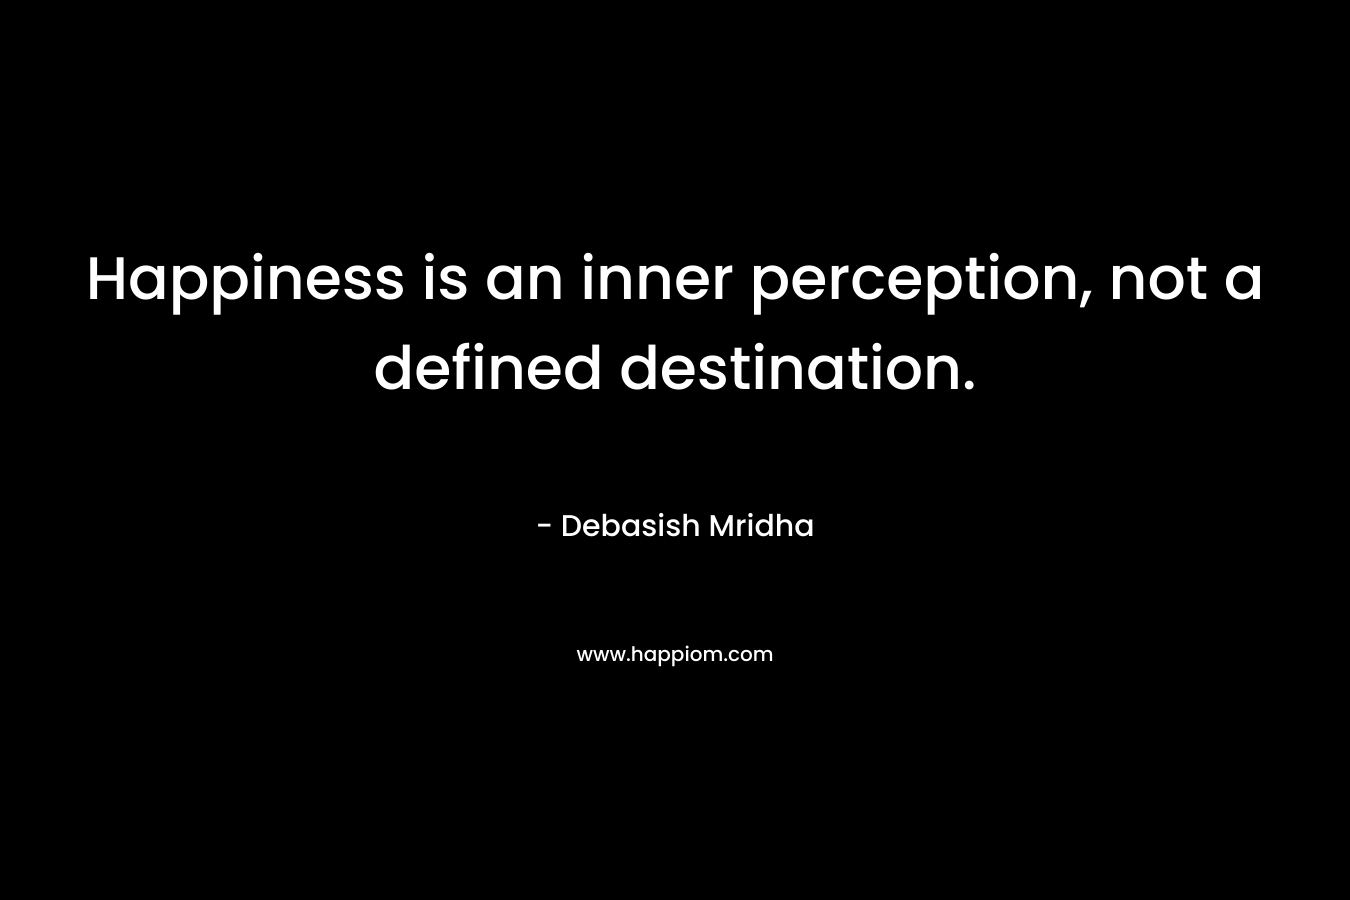 Happiness is an inner perception, not a defined destination.